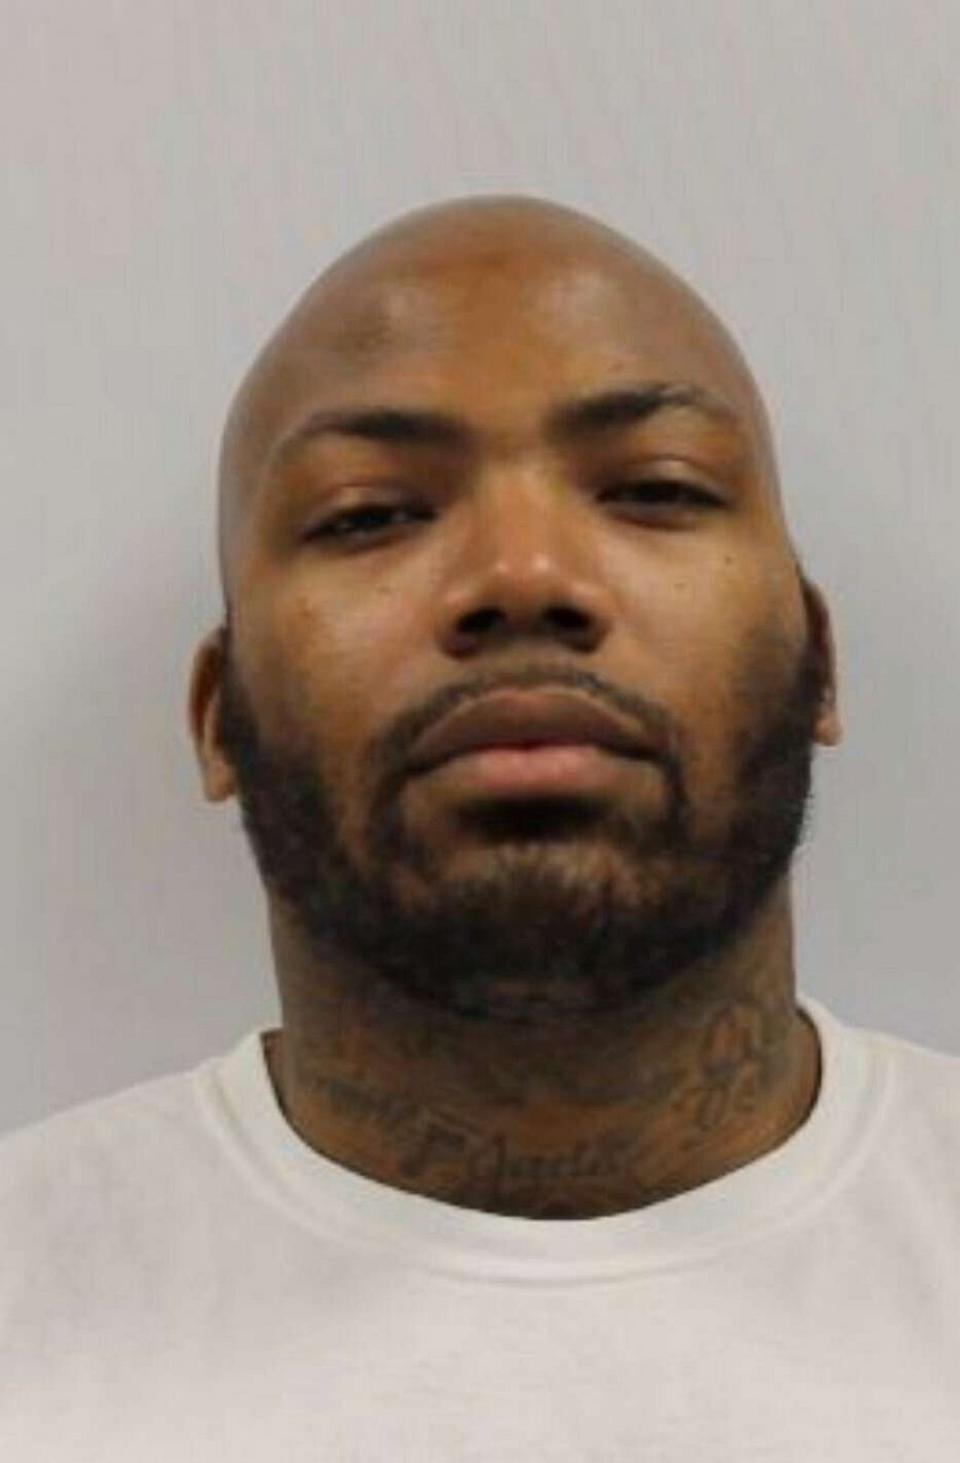 PHOTO: The Baltimore Police Department released this photo of Jason Dean Billingsley. (Baltimore Police Department)